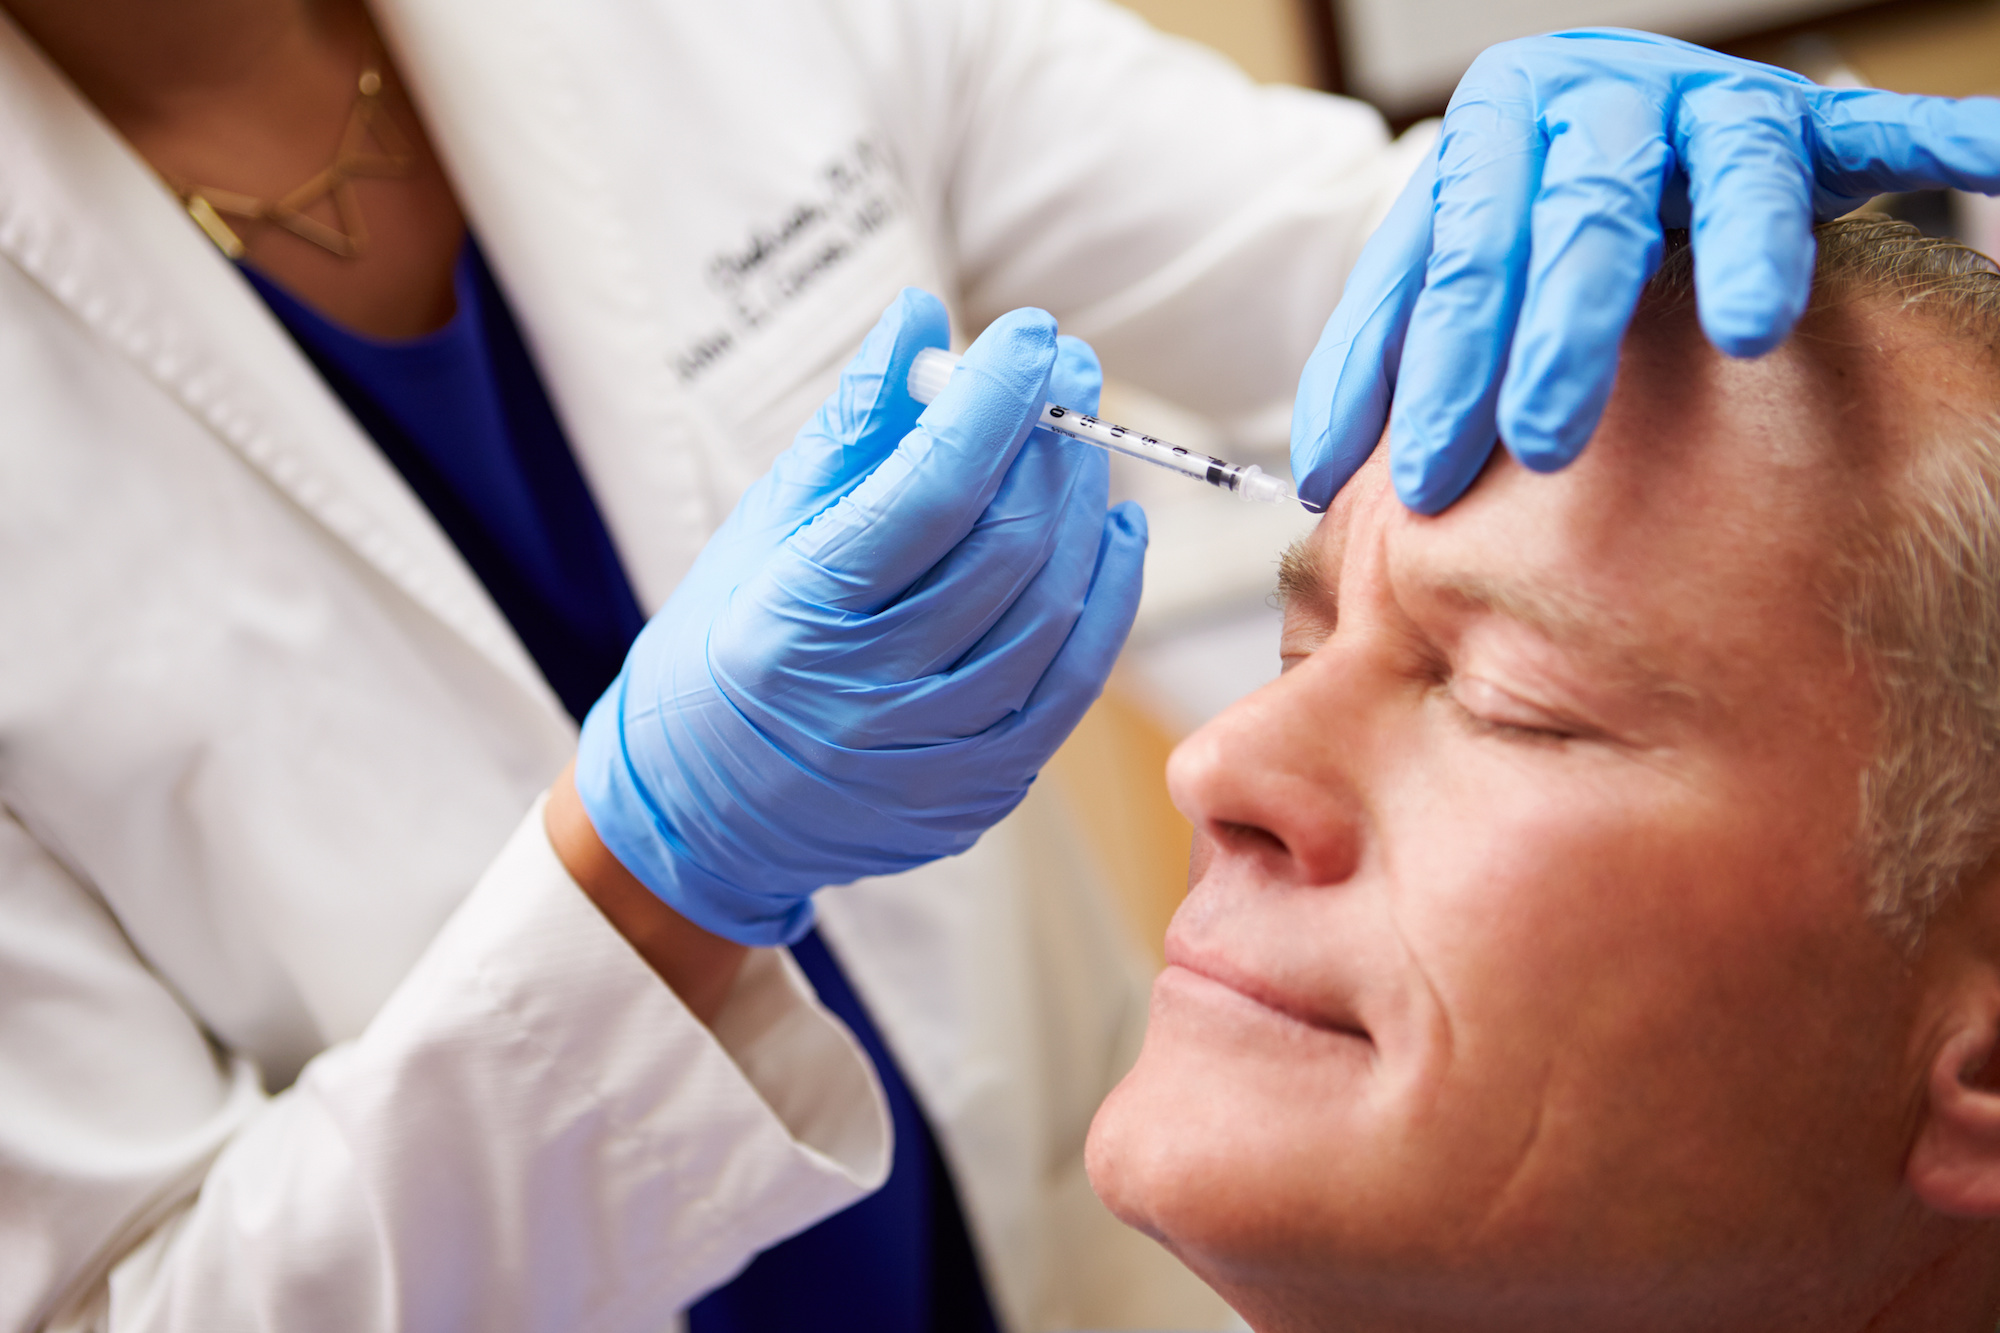 Why Do Botox Injections Cause Headaches for Some Patients?